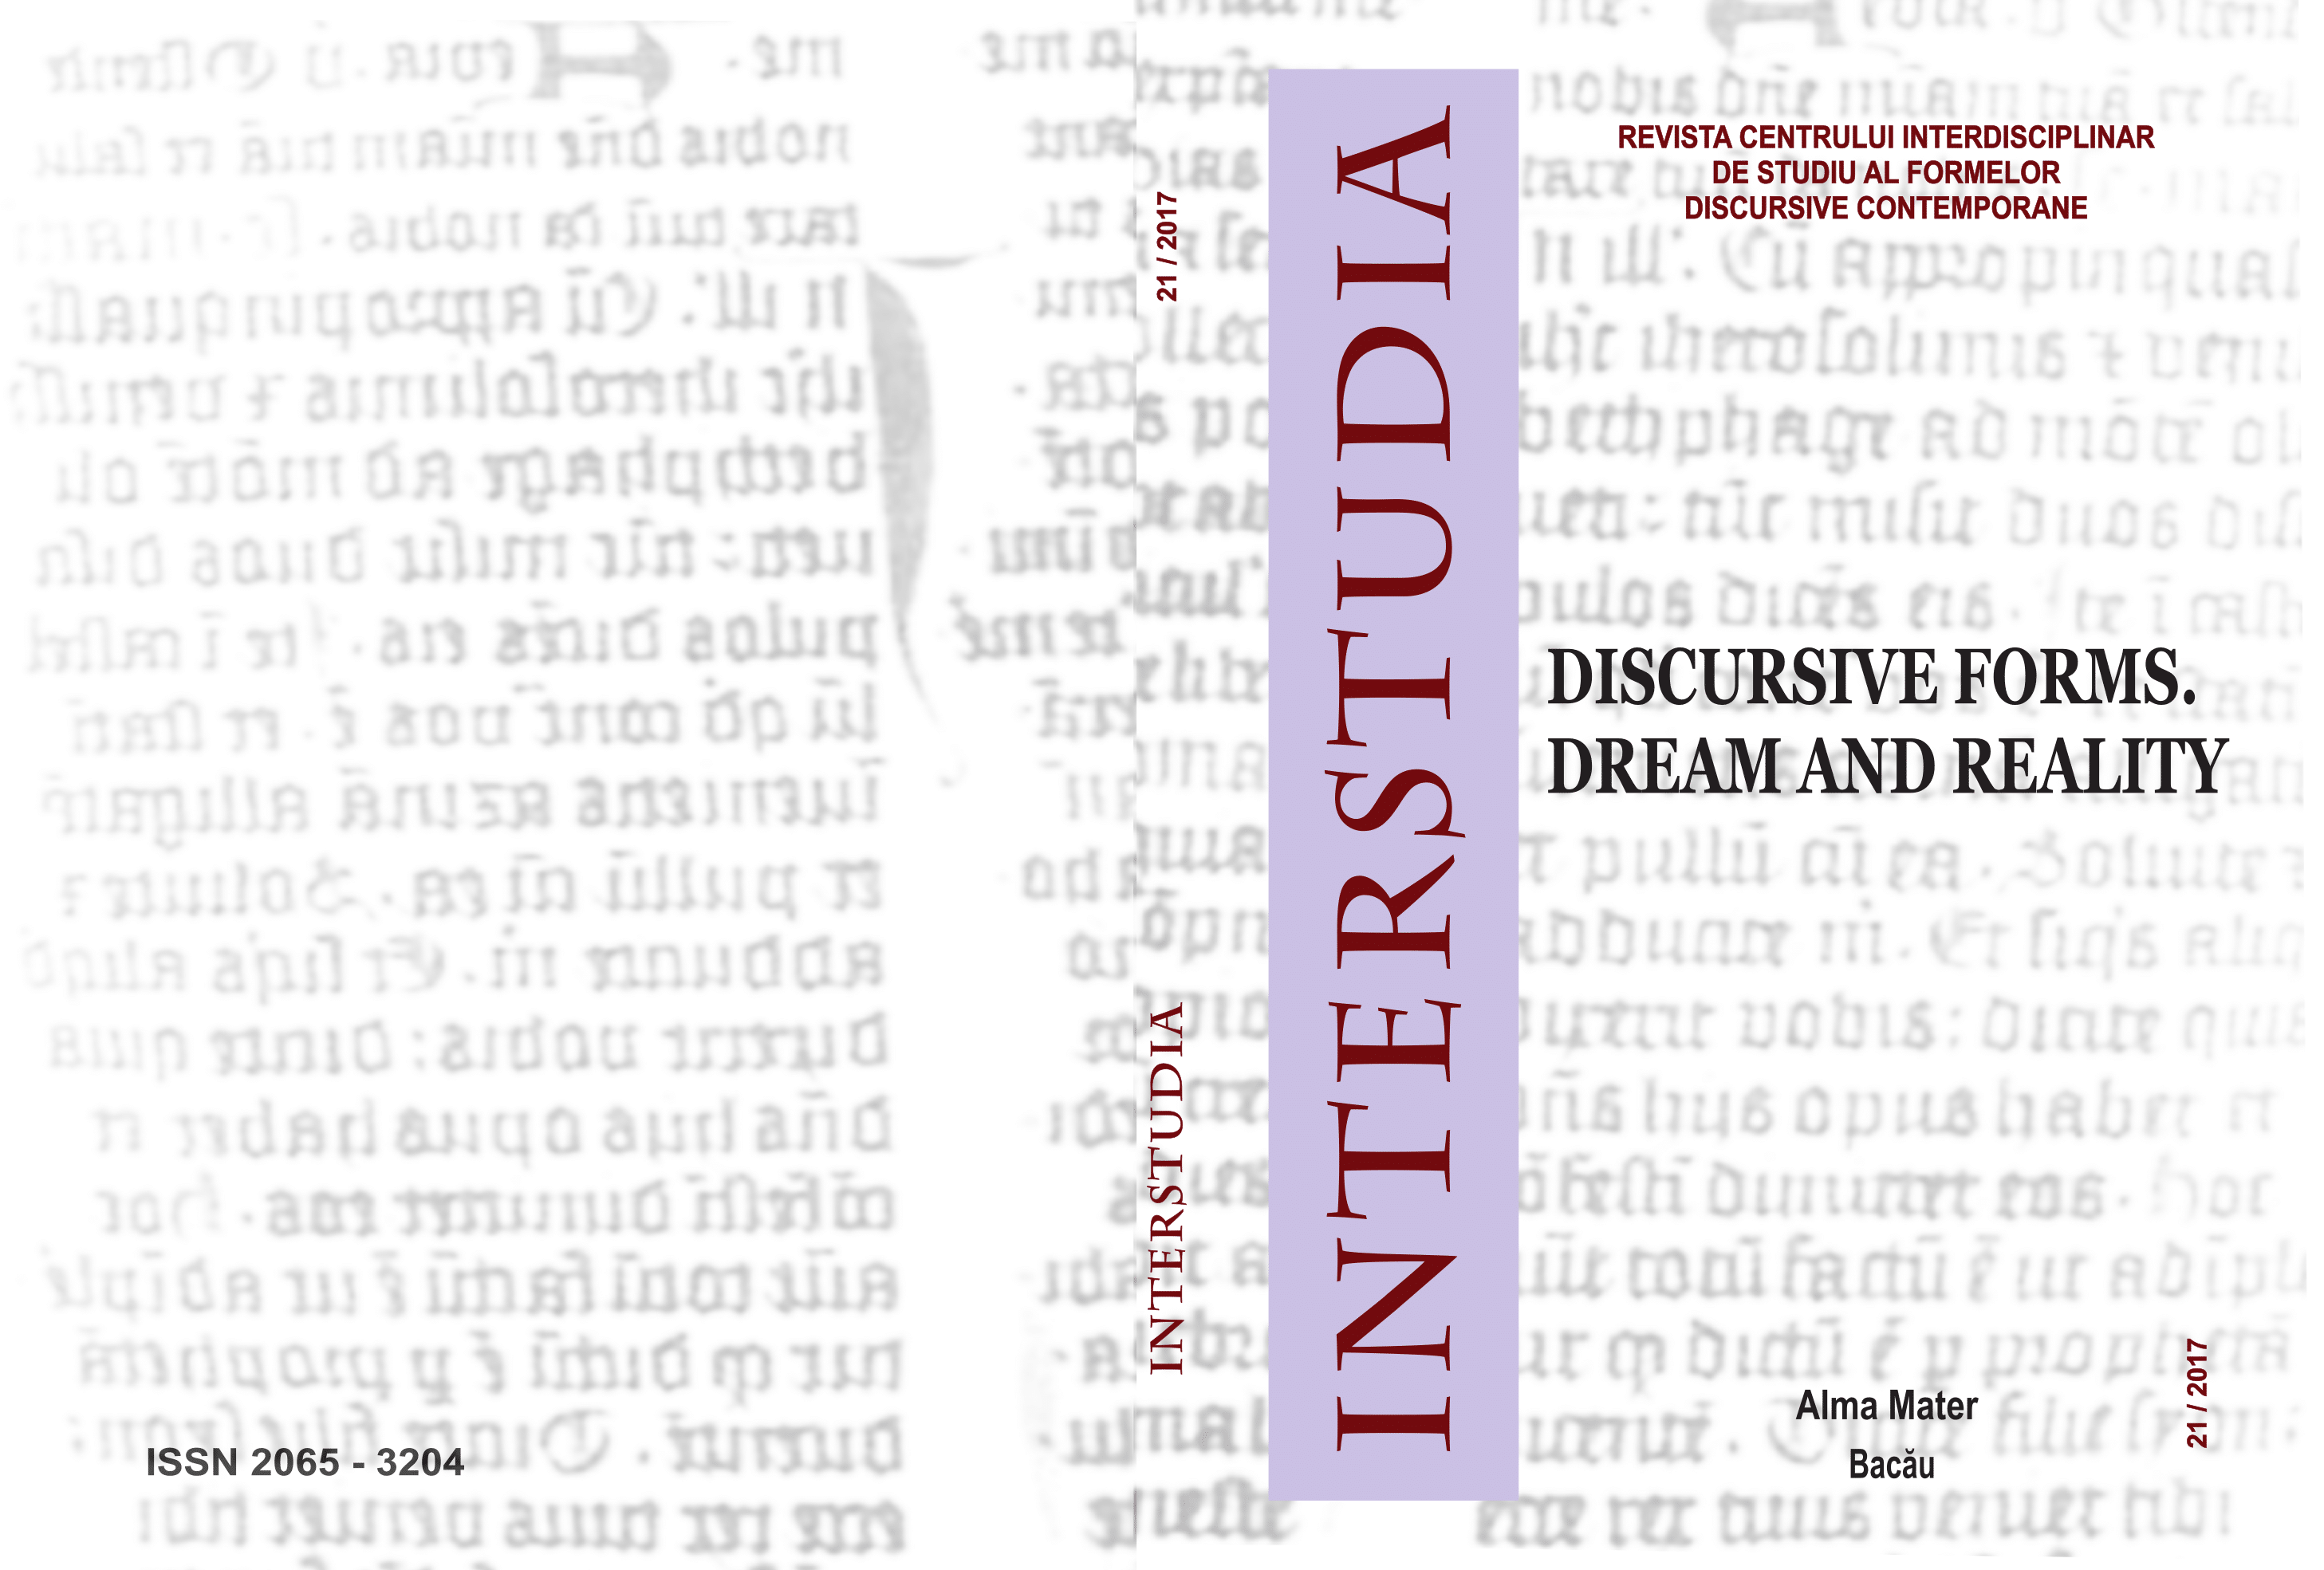 “I HAVE SPREAD MY DREAMS UNDER YOUR FEET. TREAD SOFTLY BECAUSE YOU TREAD ON MY DREAMS”. WHERE VISUAL ART MEETS VERBAL ART: CONSTANTIN BRÂNCUȘI AND W.B. YEATS Cover Image